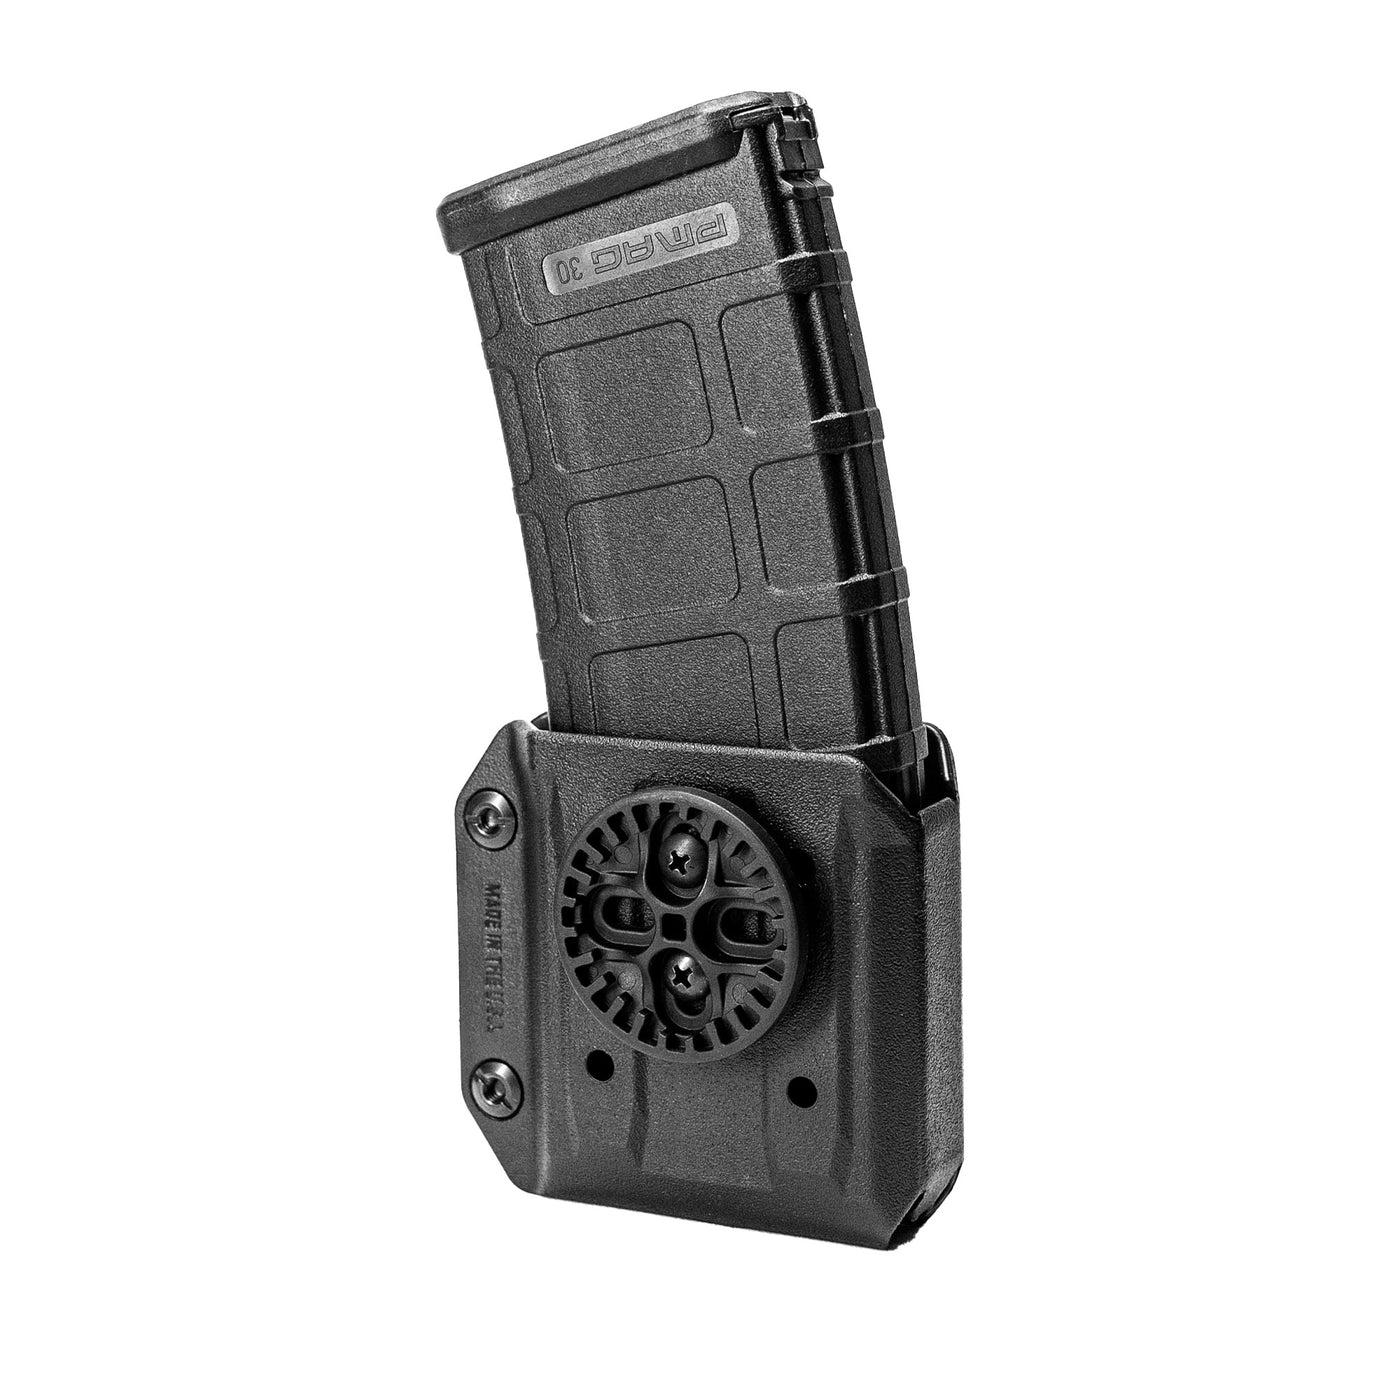 Signature AR Mag Pouch